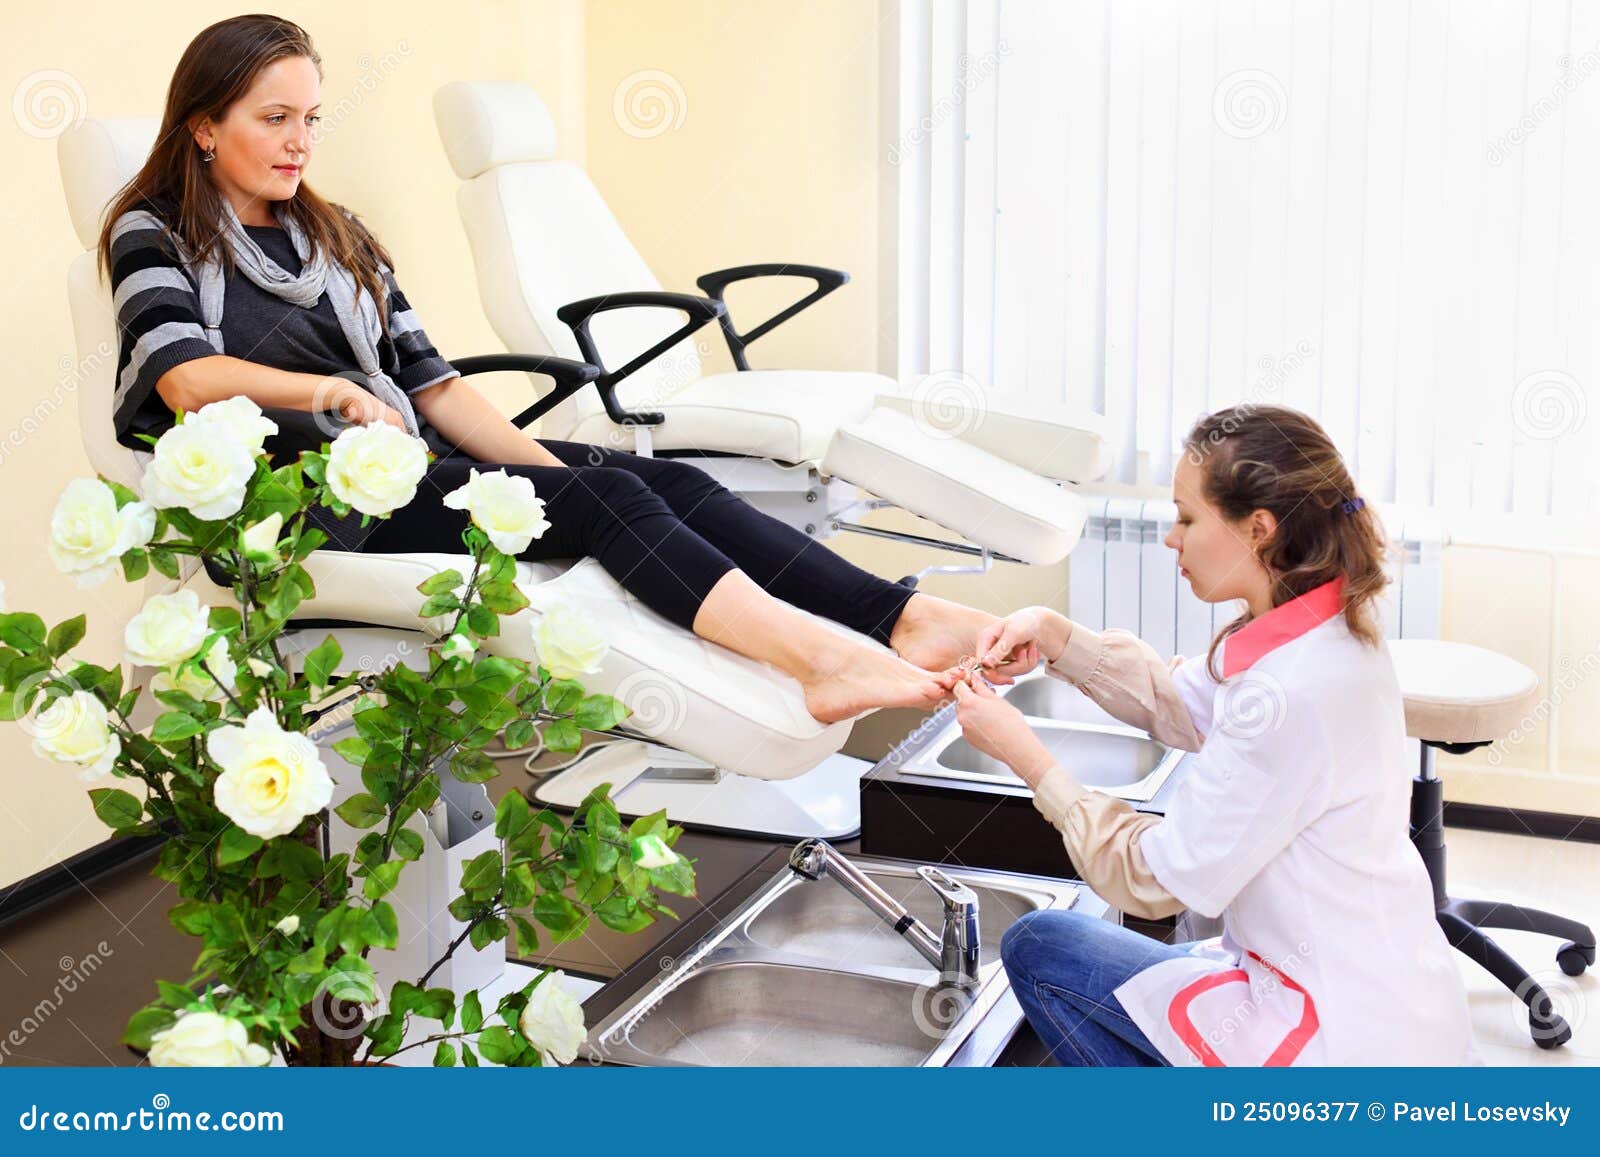 woman practices chiropody taking care of feet